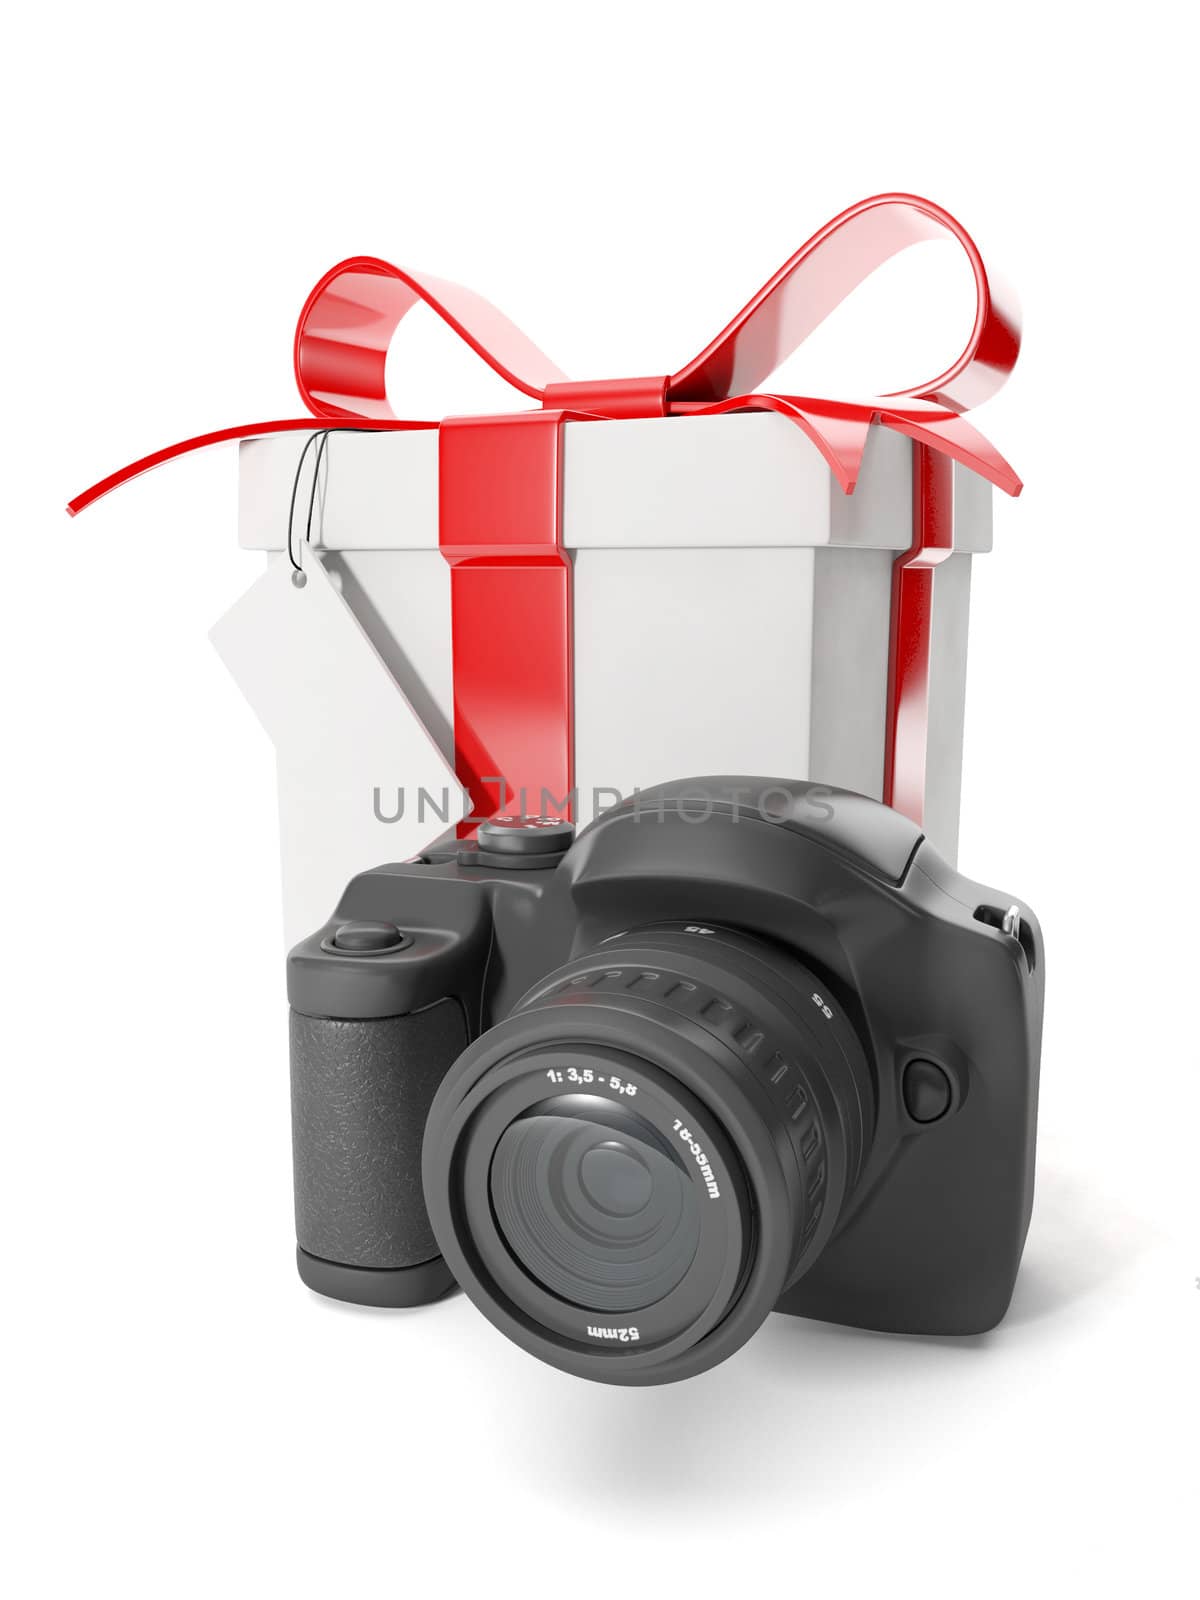 3d illustration: Technology as a gift the prize to win. Camera a by kolobsek